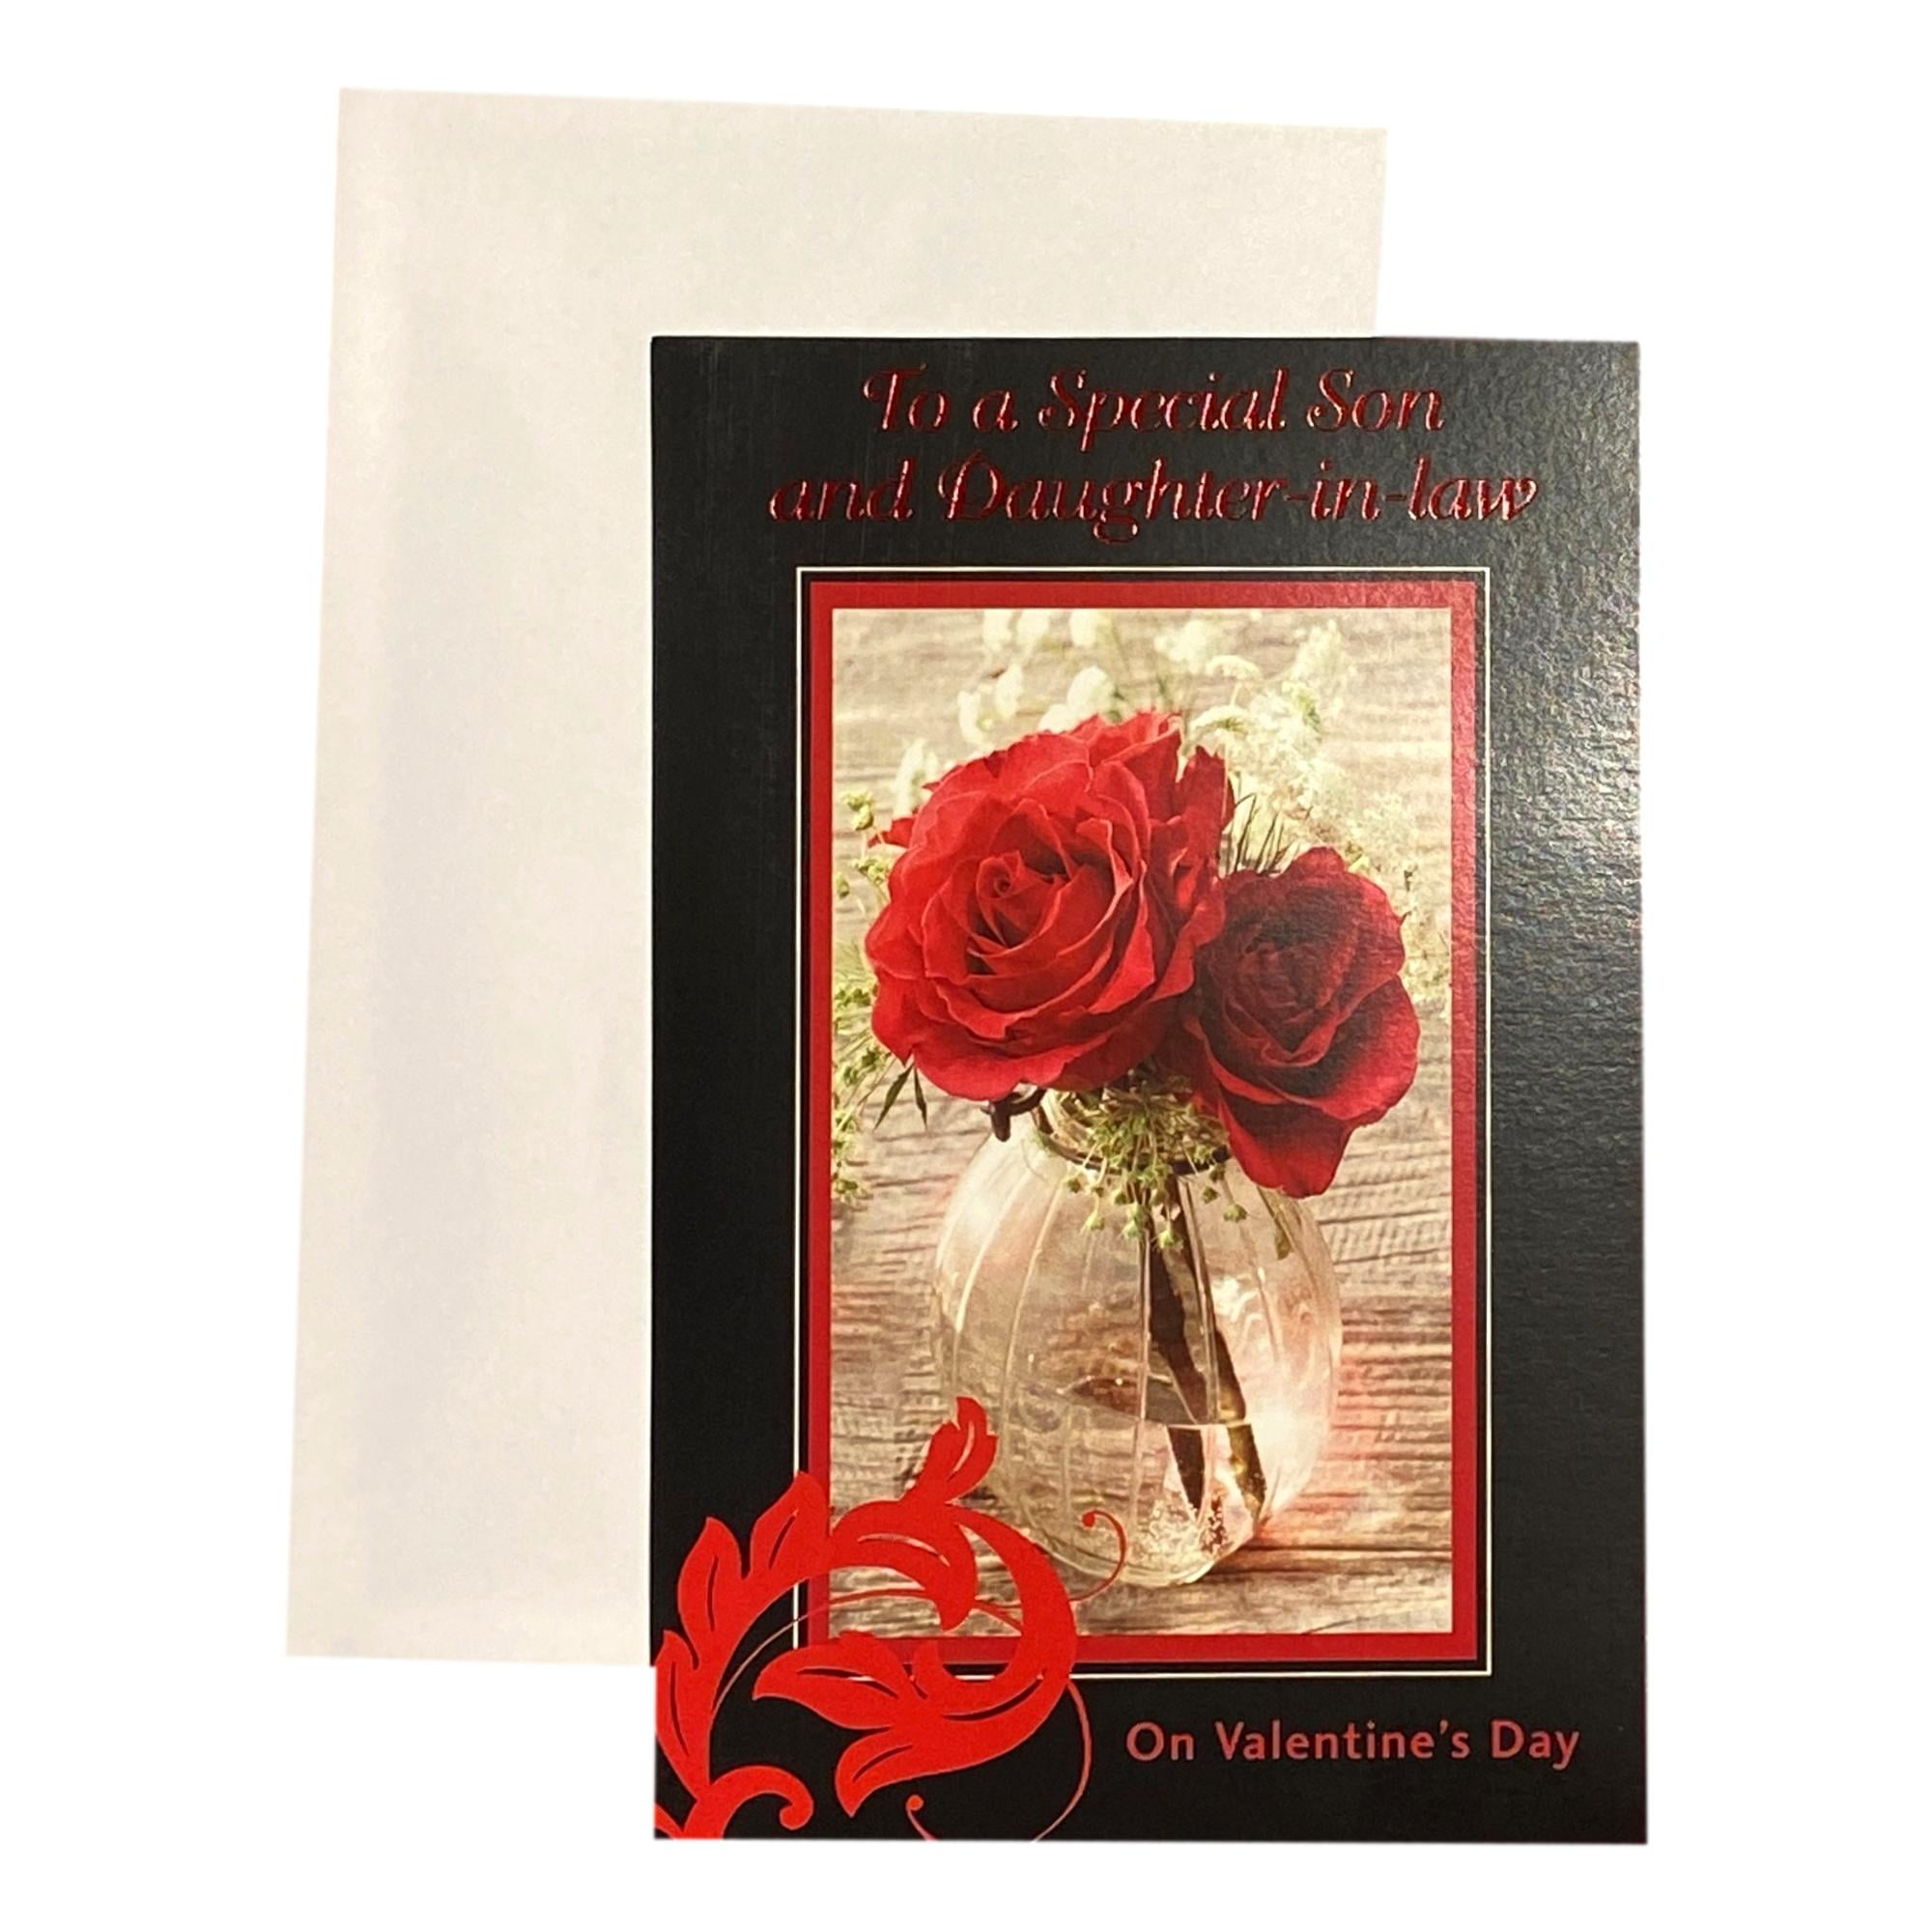 Son To a Special Son and Daughter with Valentine's Day Greeting Card for Wife 